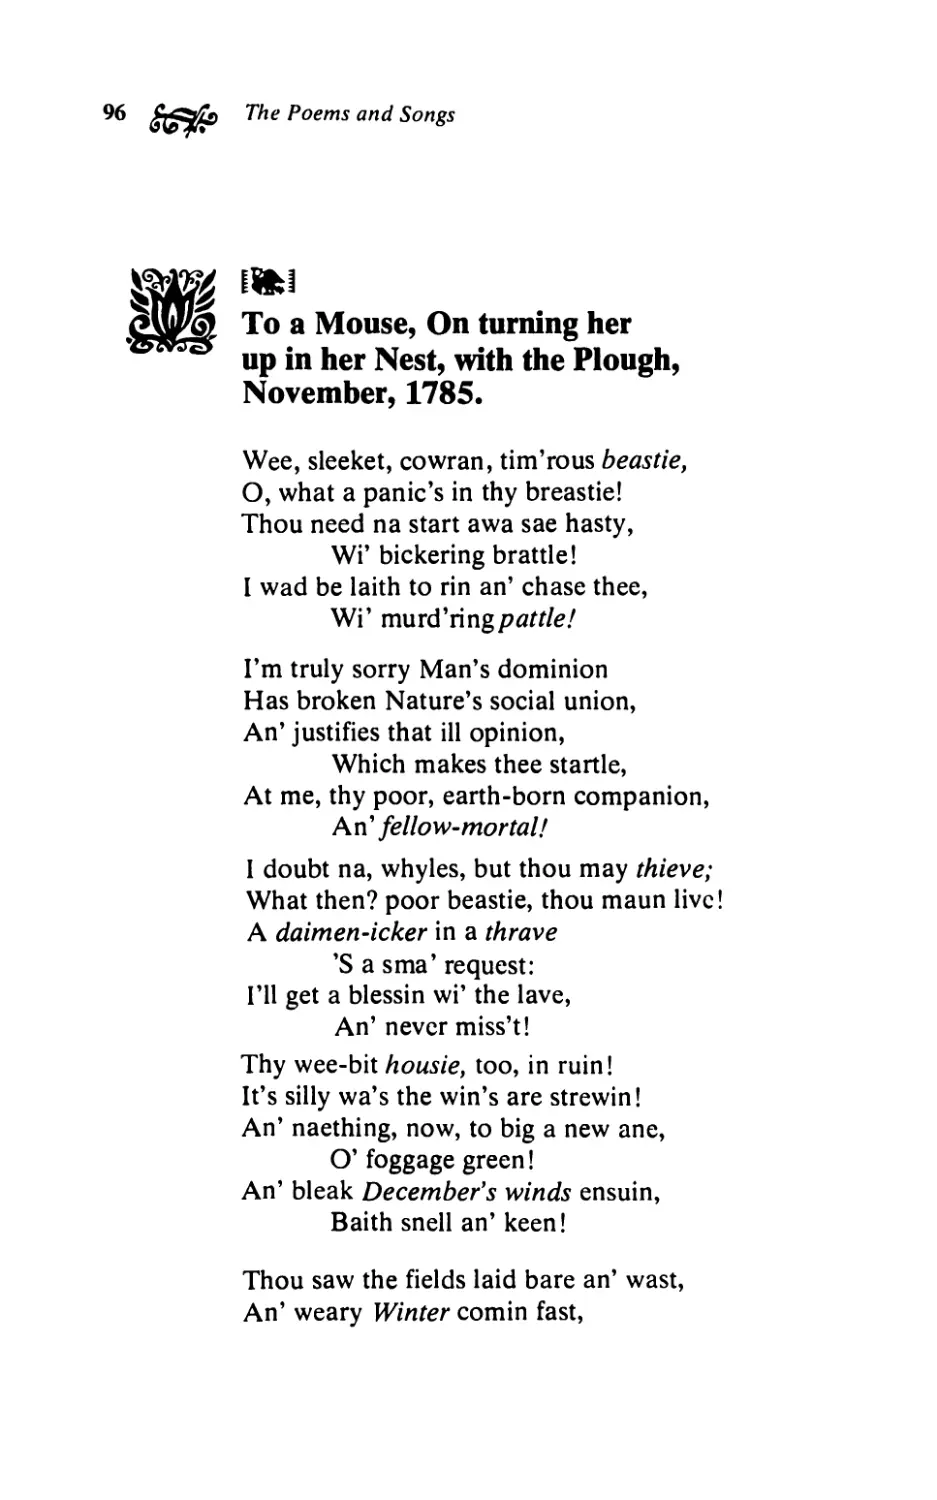 То a Mouse, On turning her up in her Nest, with the Plough, November, 1785